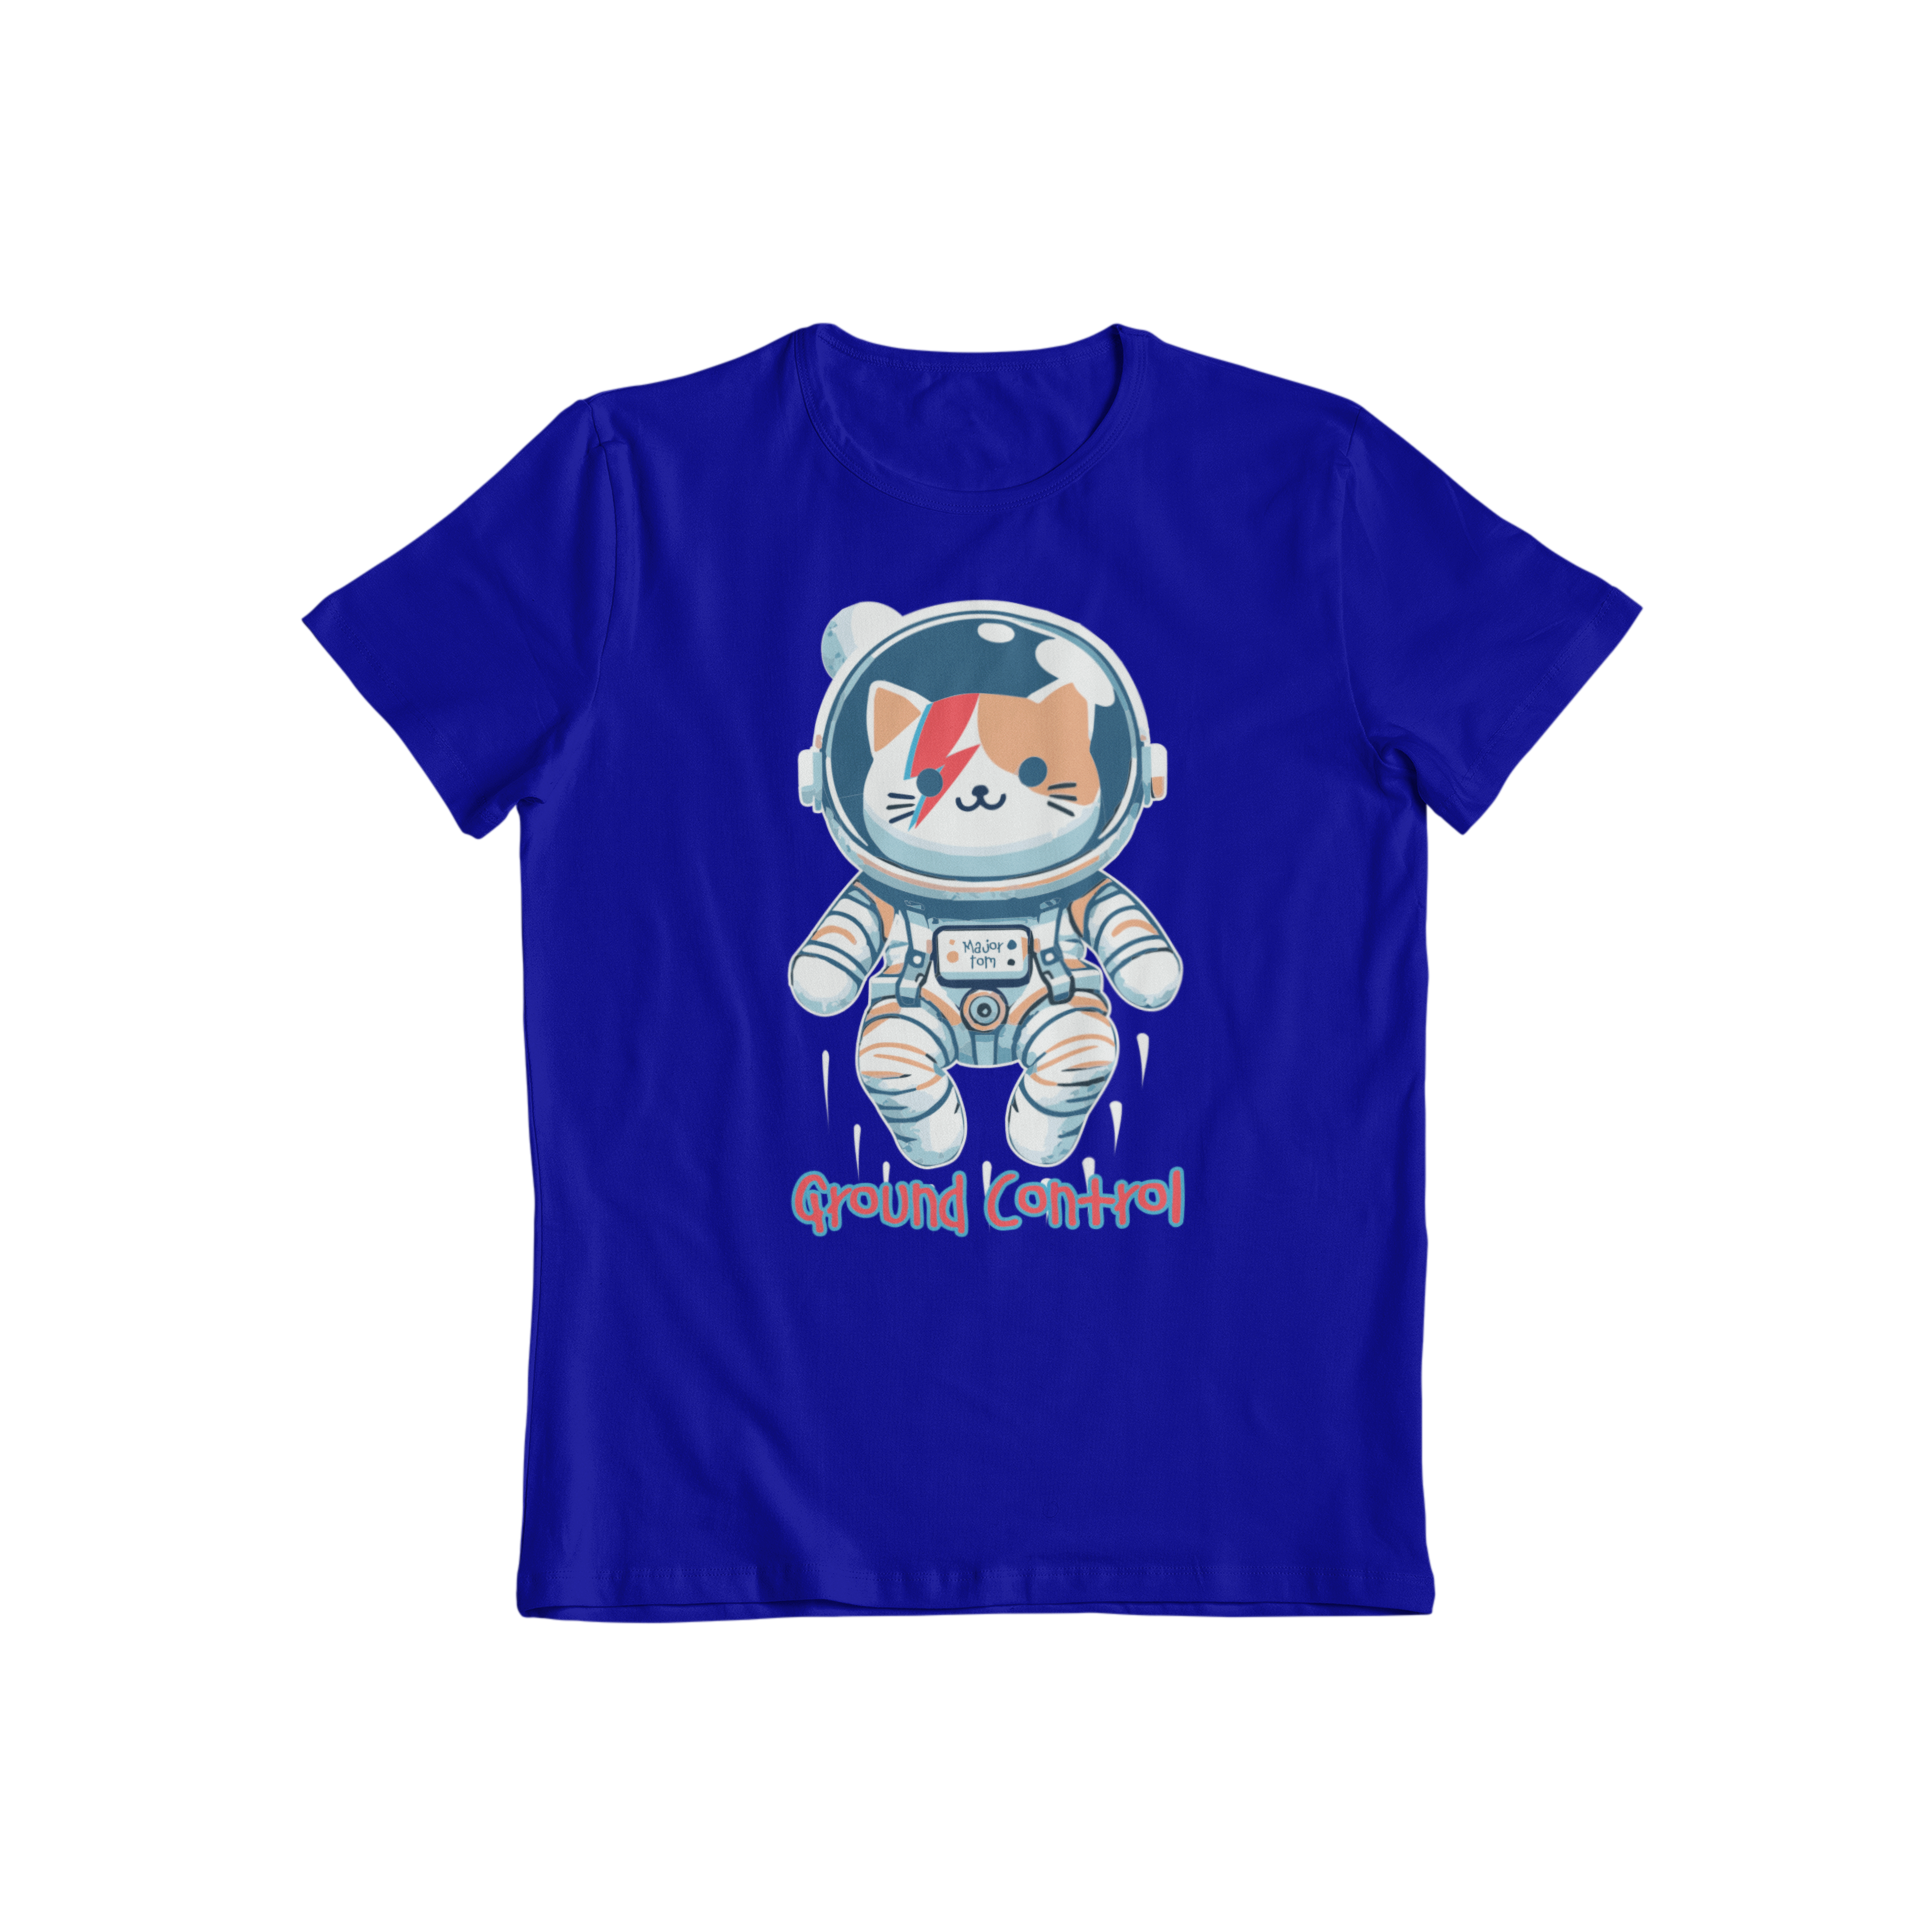 Get ready to blast off in style with our Major Tom T-shirt! Featuring a feline explorer dressed in an astronaut suit, this graphic tee pays homage to David Bowie's iconic "Space Oddity" song. Perfect for cat lovers and music lovers alike.